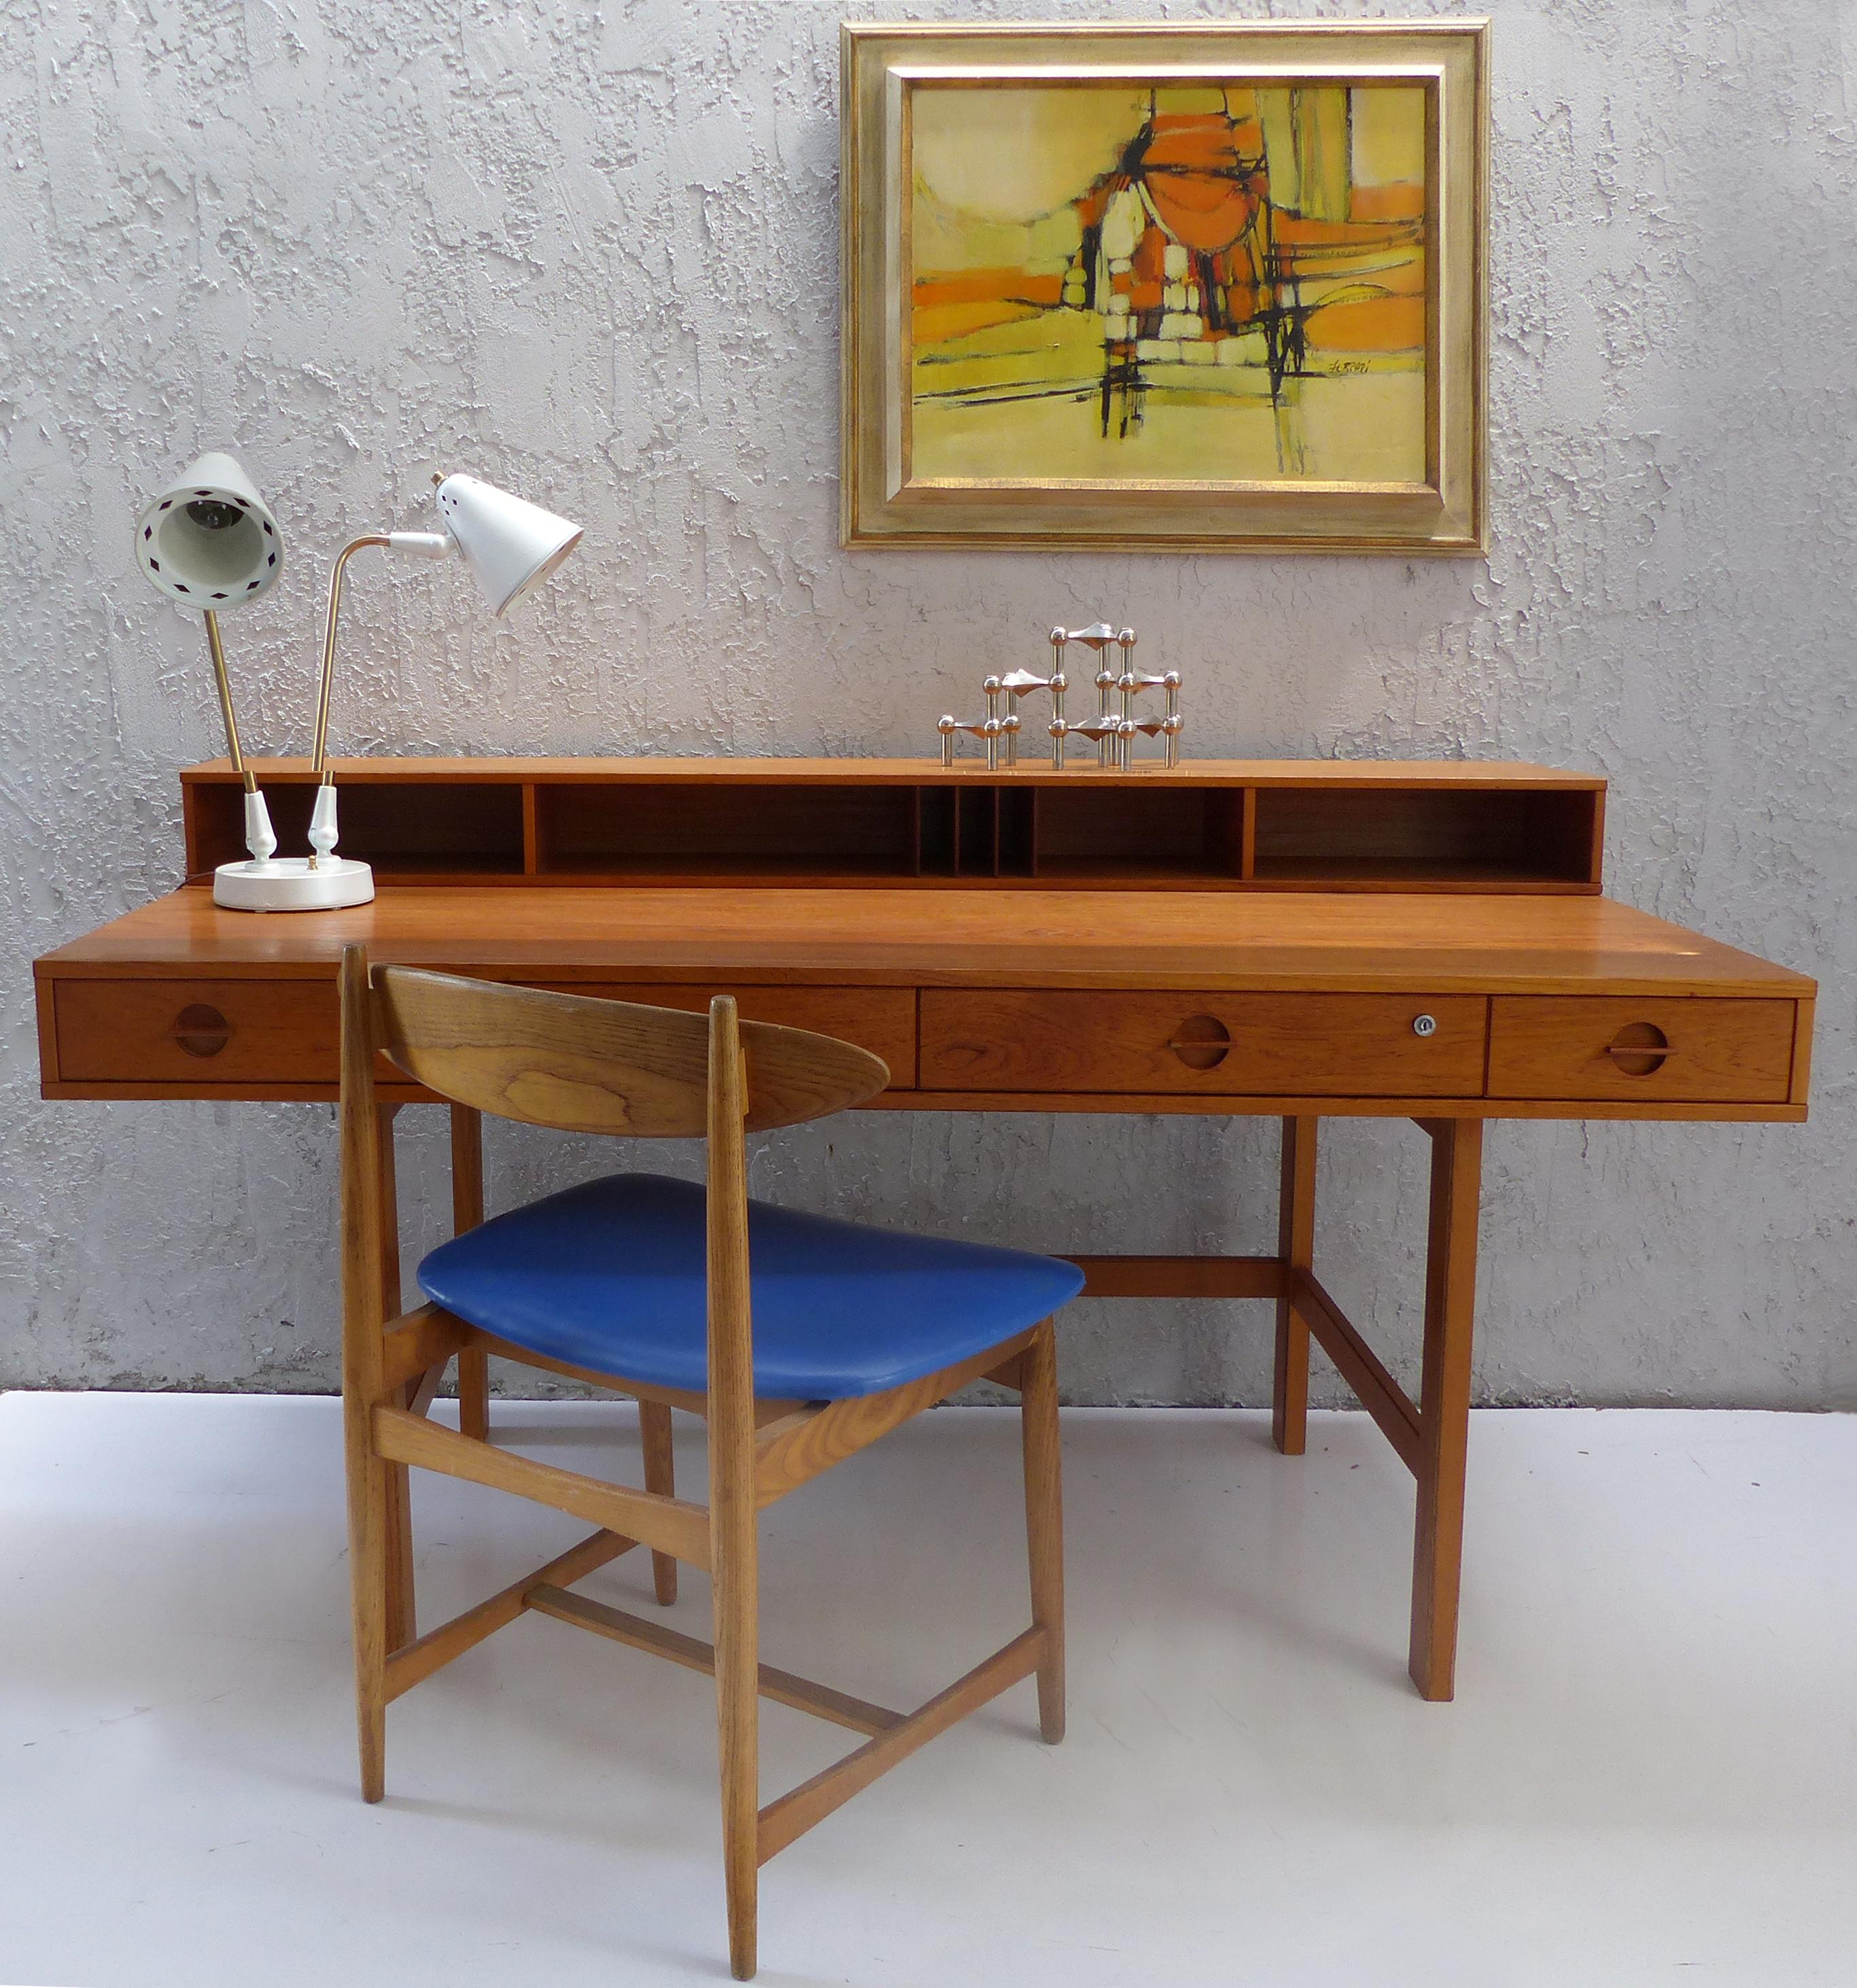 Offered for sale is a 1970s Danish modern writing desk by Peter Løvig Nielsen and Jens Quistgaard made of solid teak wood and teak veneer with a beautiful wood grain. The flip topend acts as cubby-hole storage that turns down to extend the surface